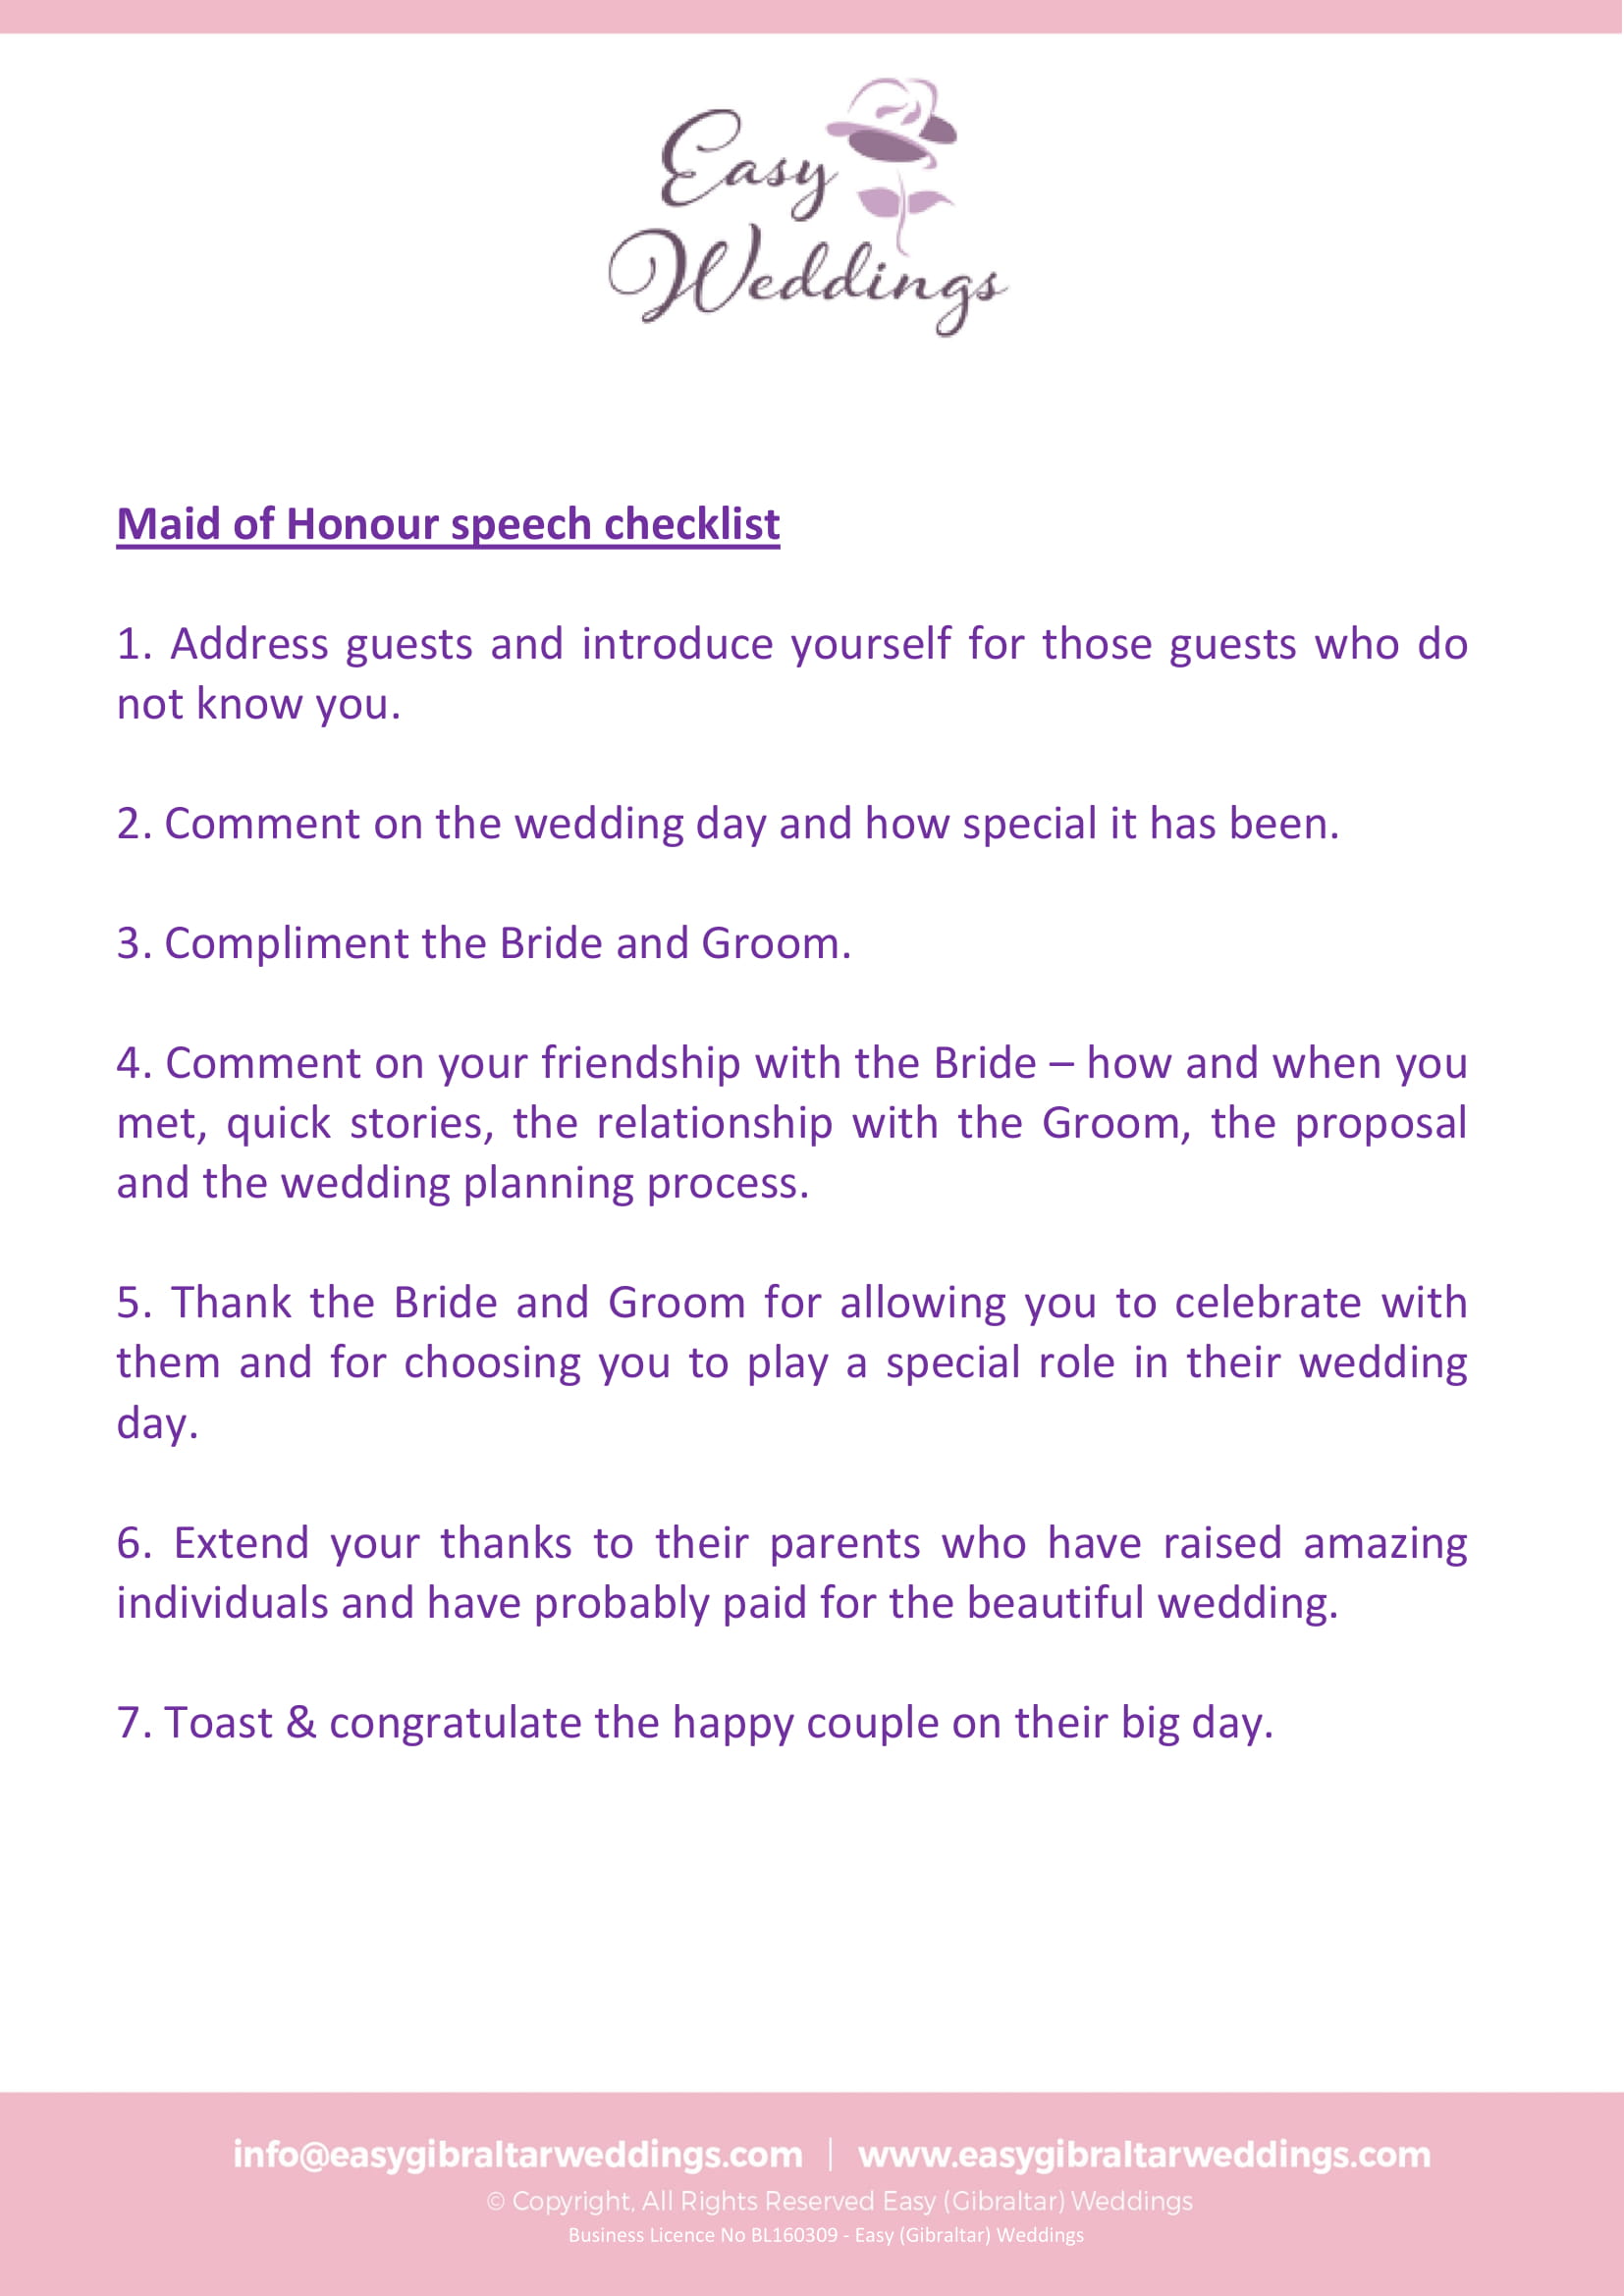 17 Maid of Honor Speech Examples - PDF  Examples